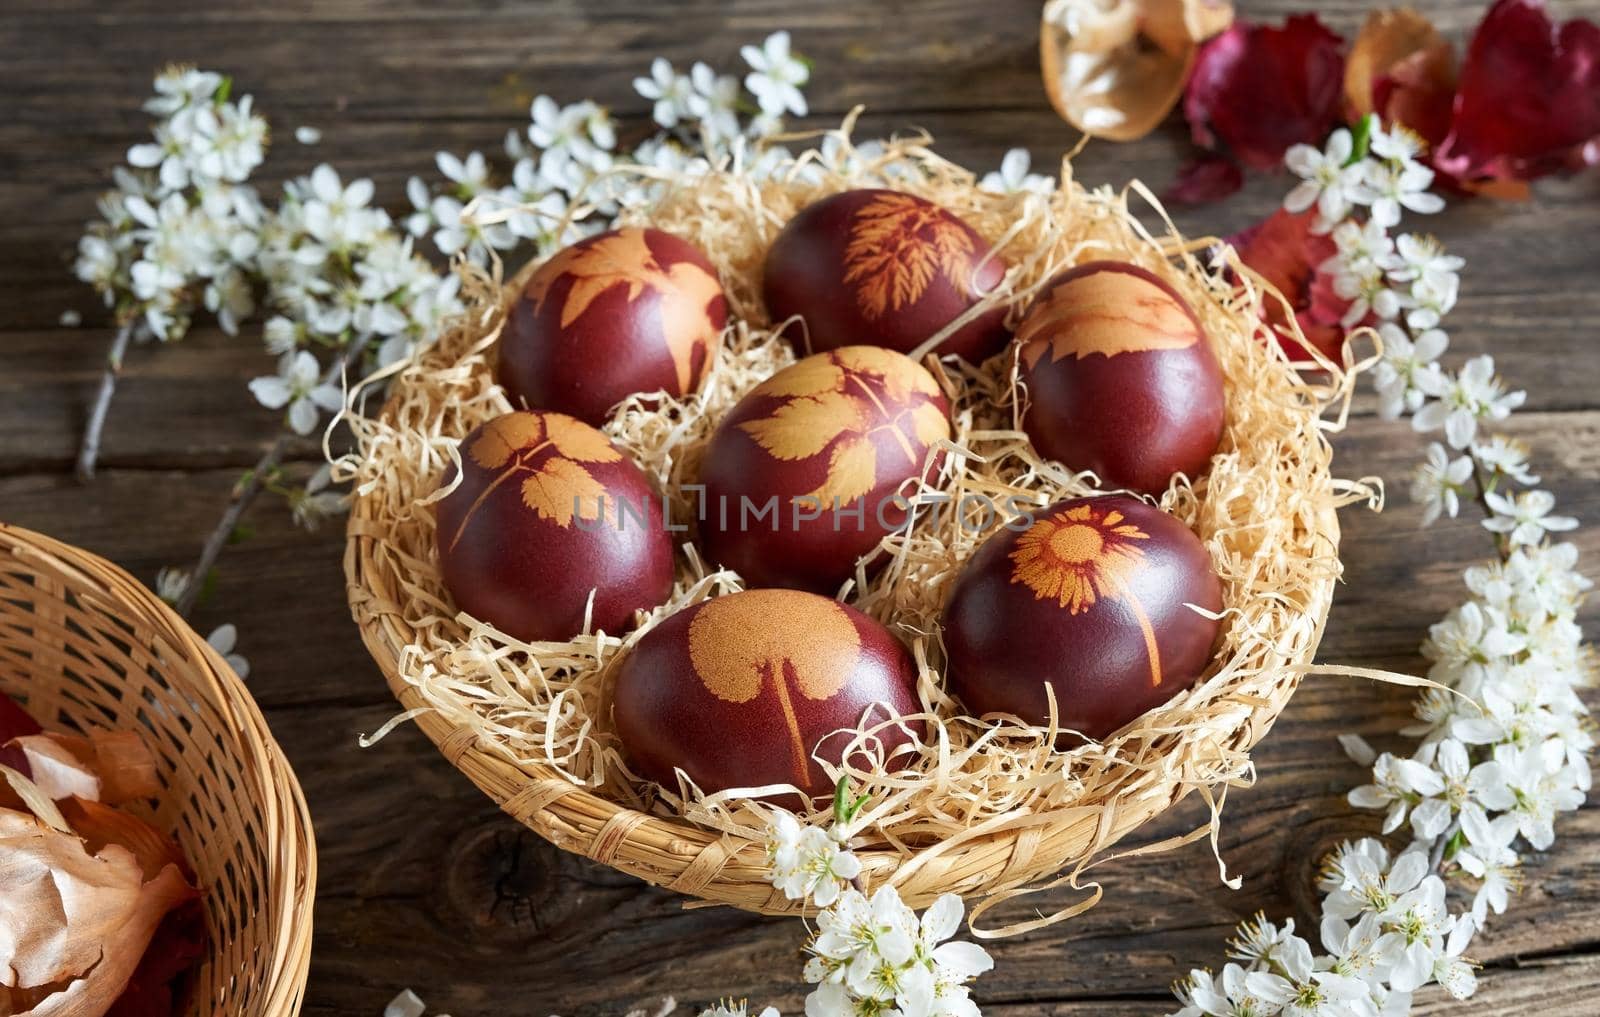 Easter eggs dyed with onion peels in a basket, with blooming tree branches  by madeleine_steinbach